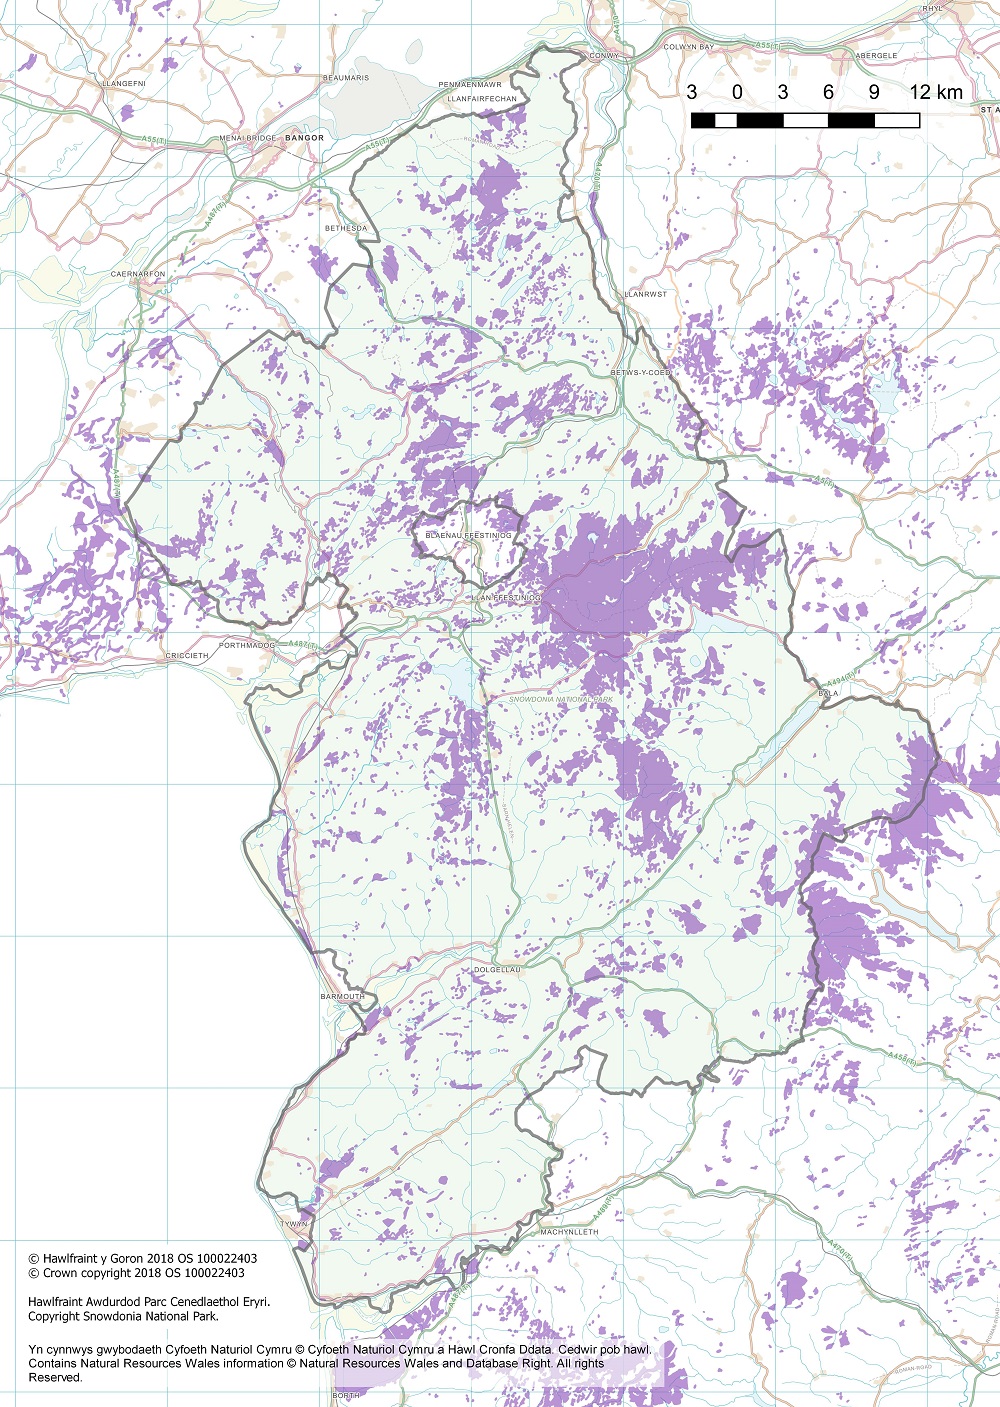 Map showing areas of peatland within Snowdonia National Park